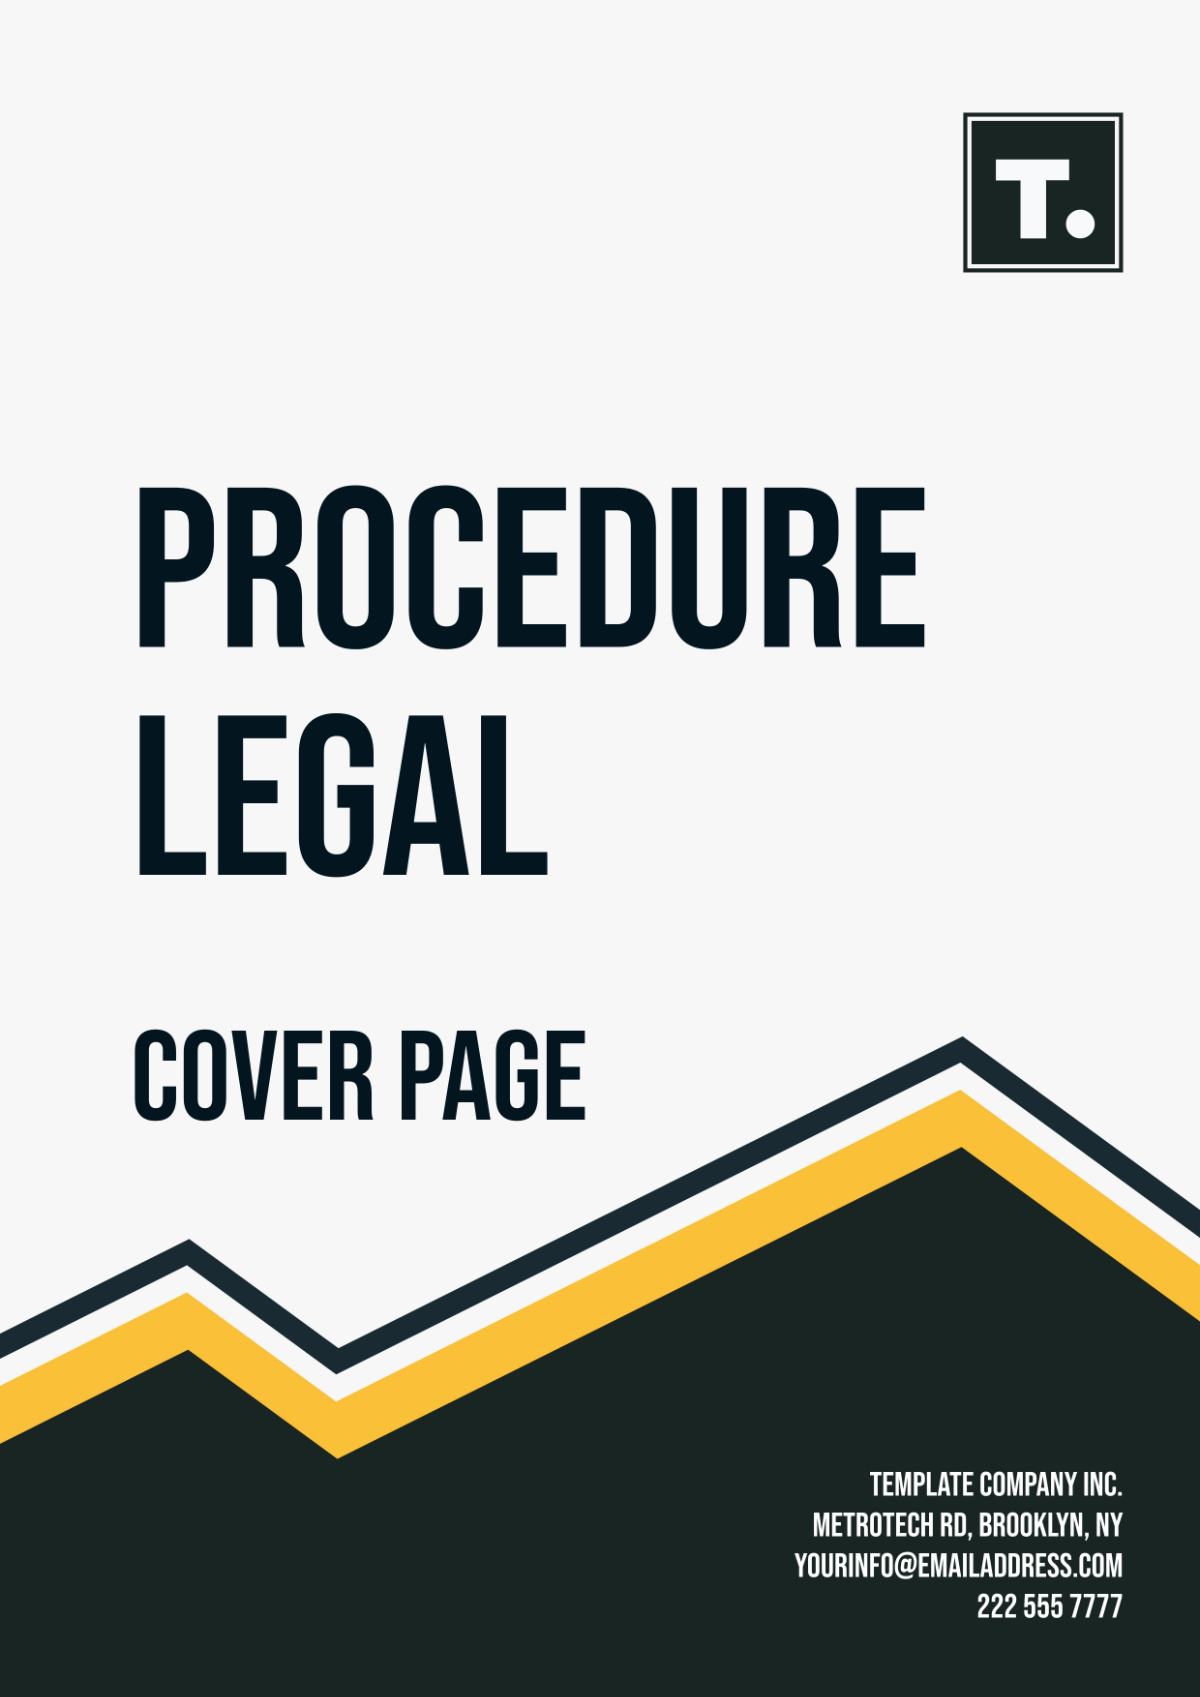 Procedure Legal Cover Page